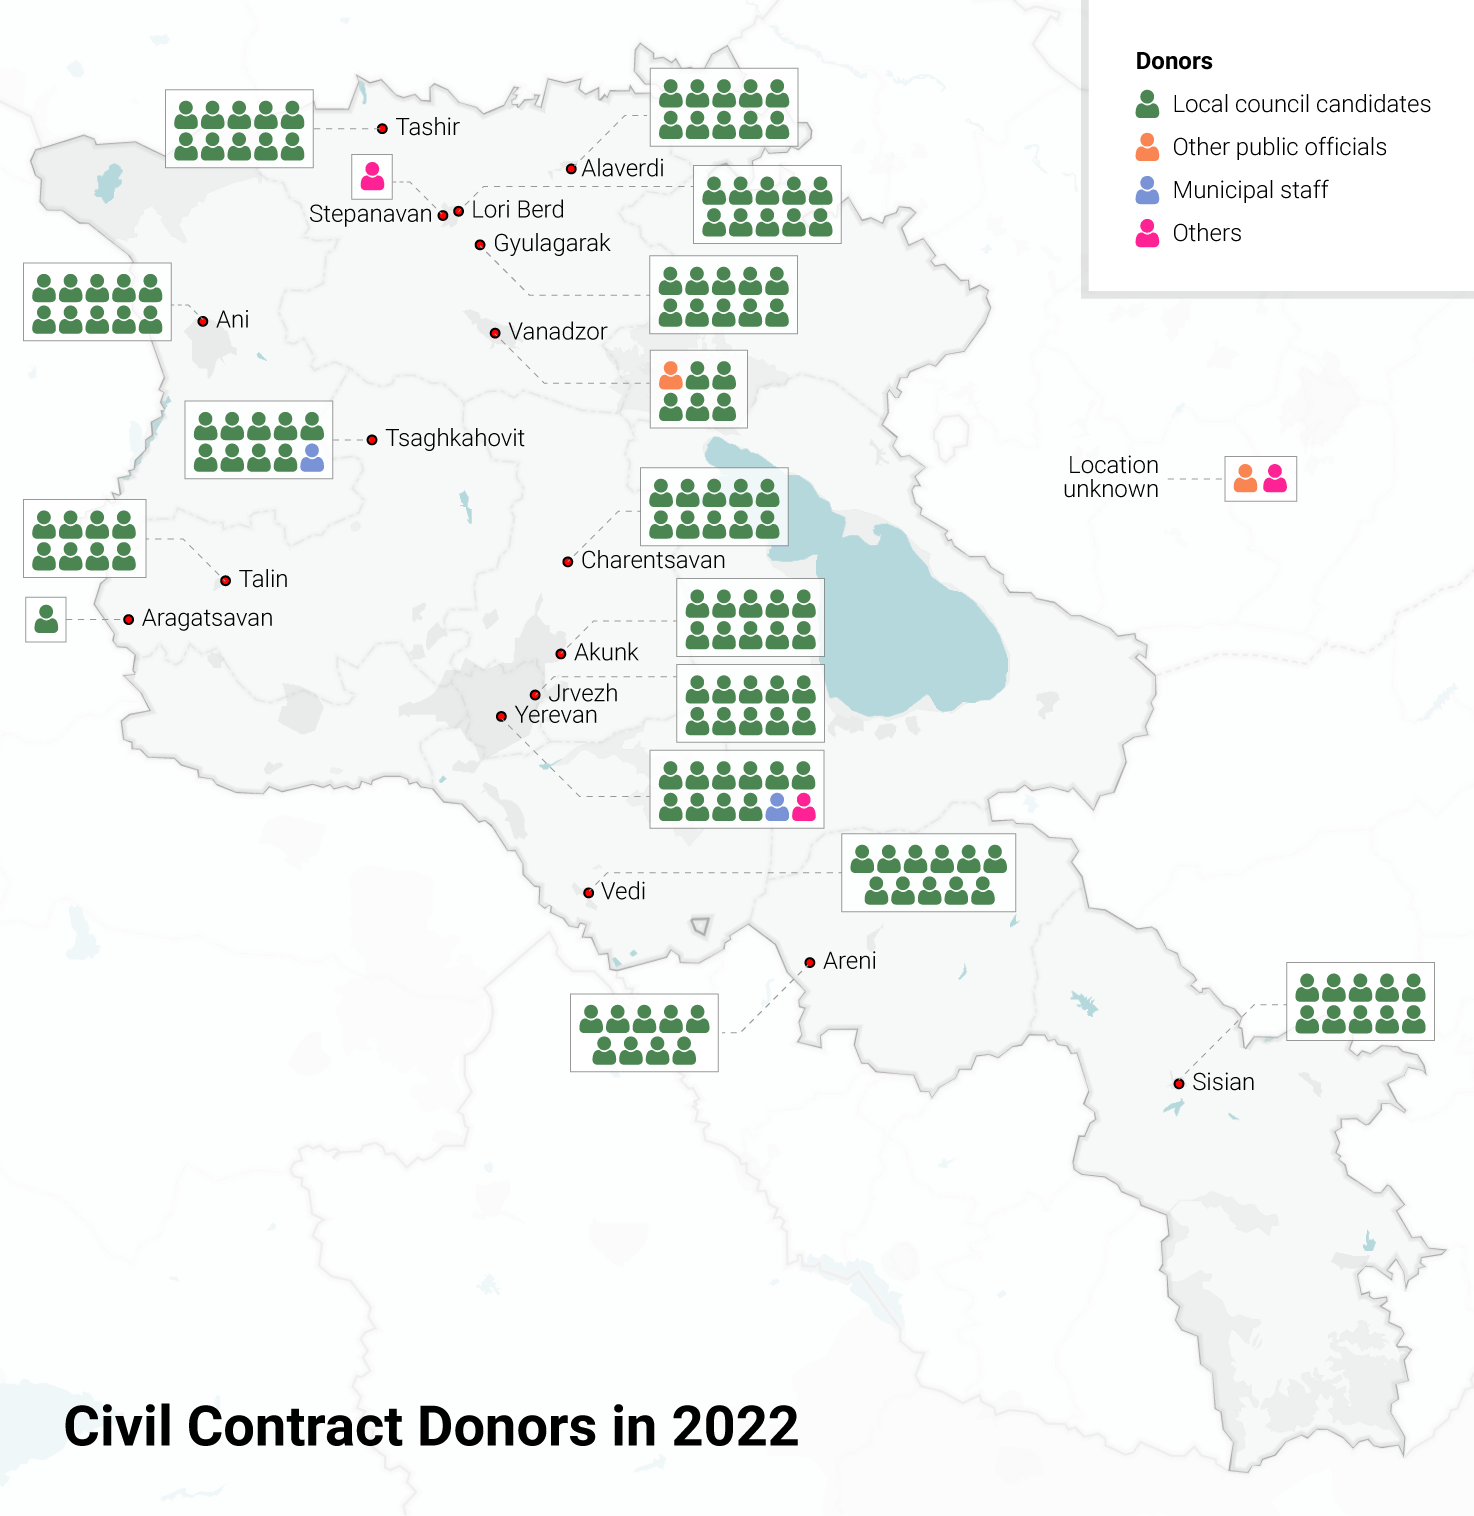 investigations/civil-contract-donors-2022-map-eng.png